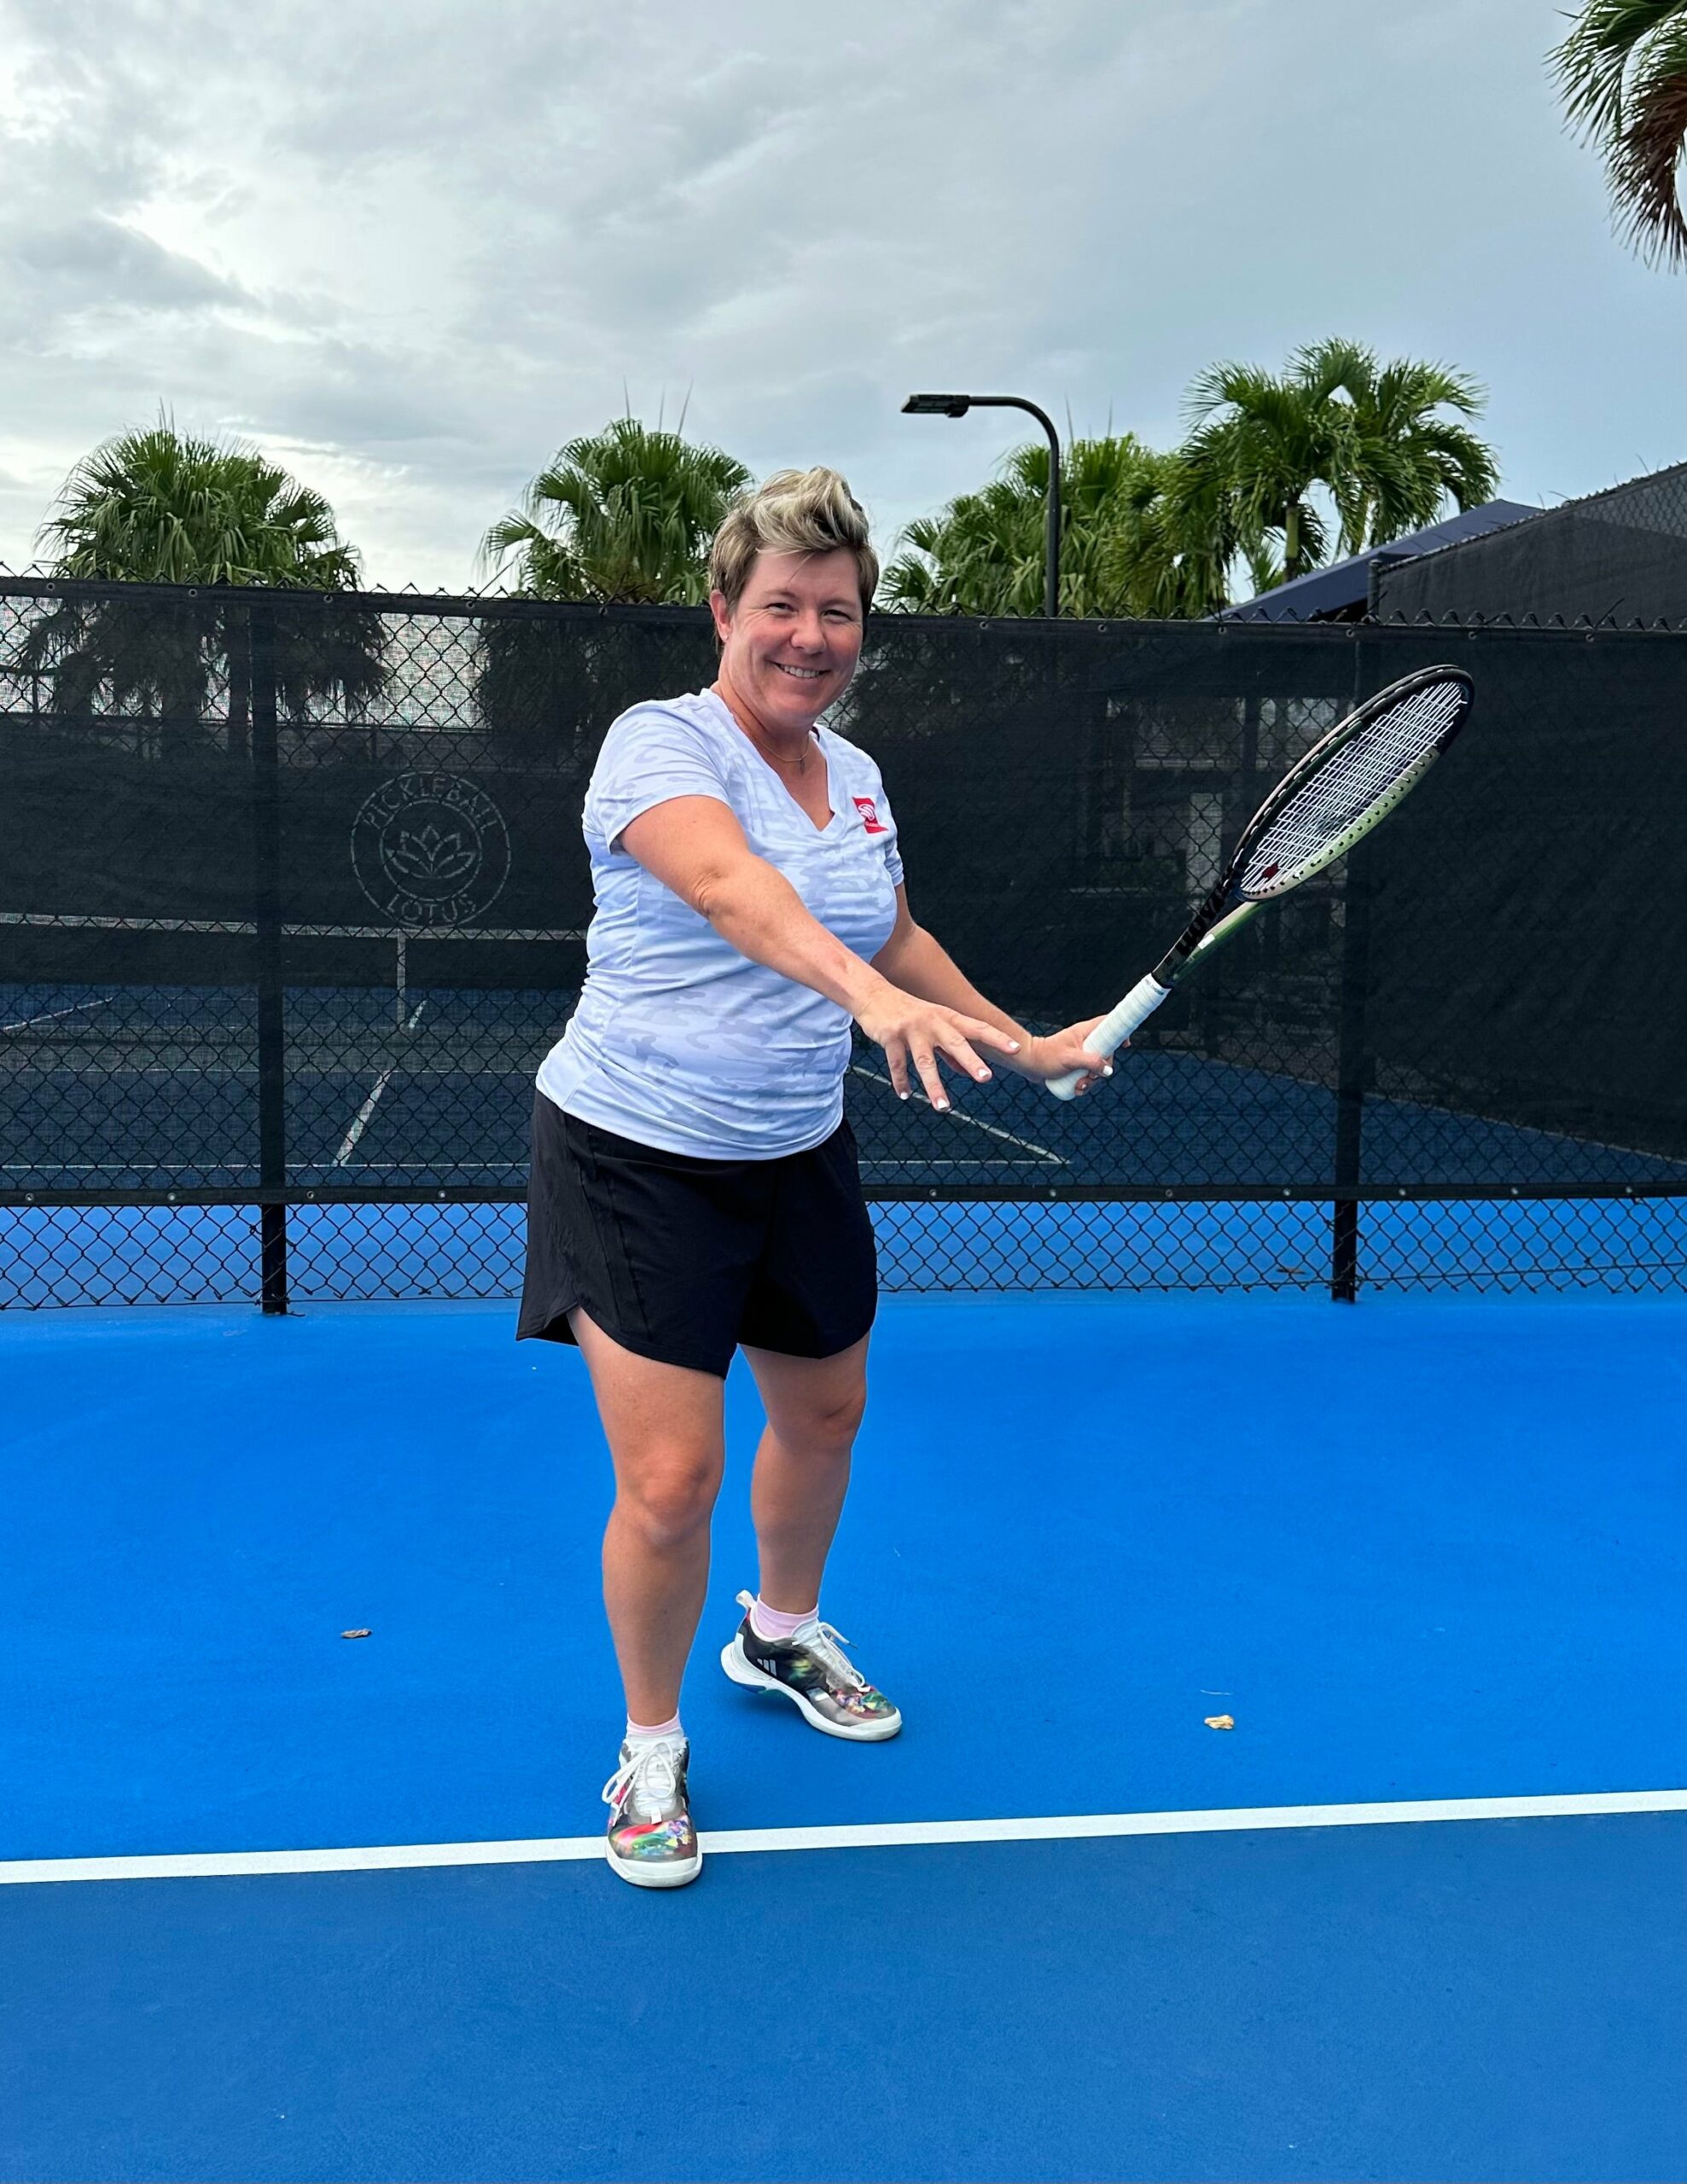 Find a Way to Pursue Your Passion—Pickleball or Otherwise